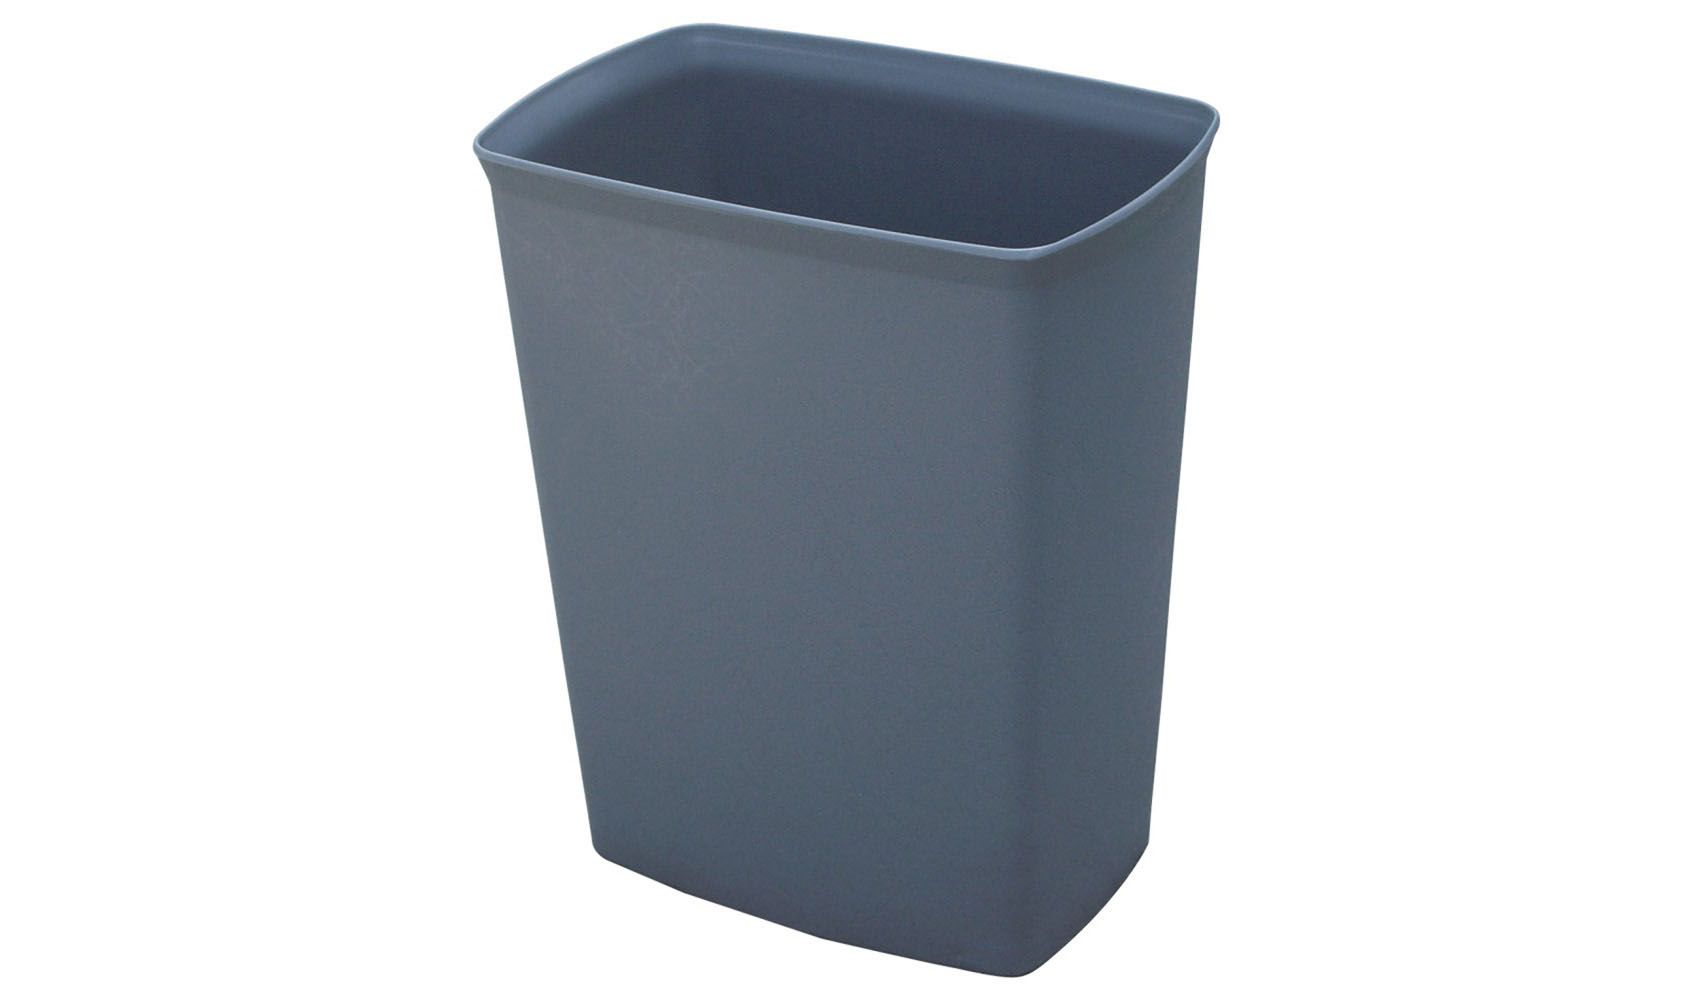 Fireproof Dustbin with Plastic Material with Hot Selling (KL-38)